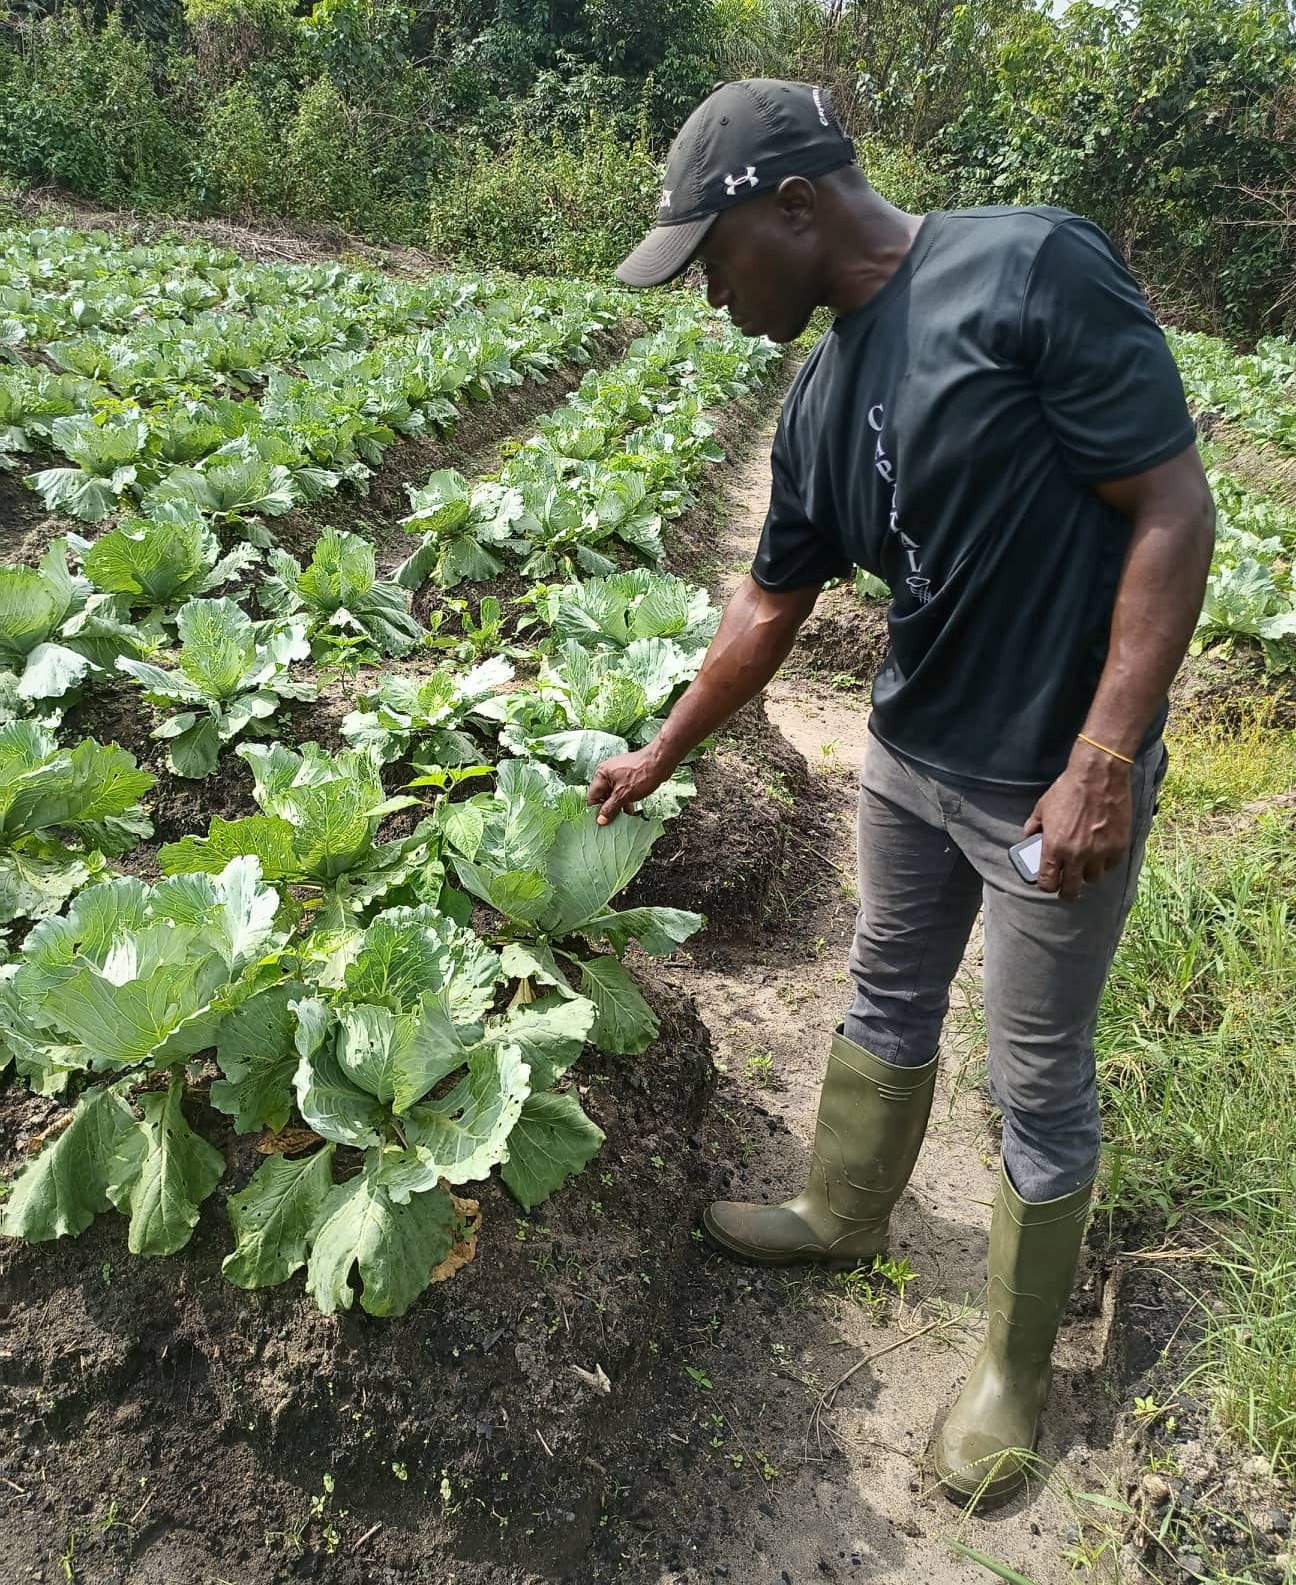 Toney is the Project Manager of All God's Favor Farming Group. They planted a huge crop of cabbages on their double dug beds.